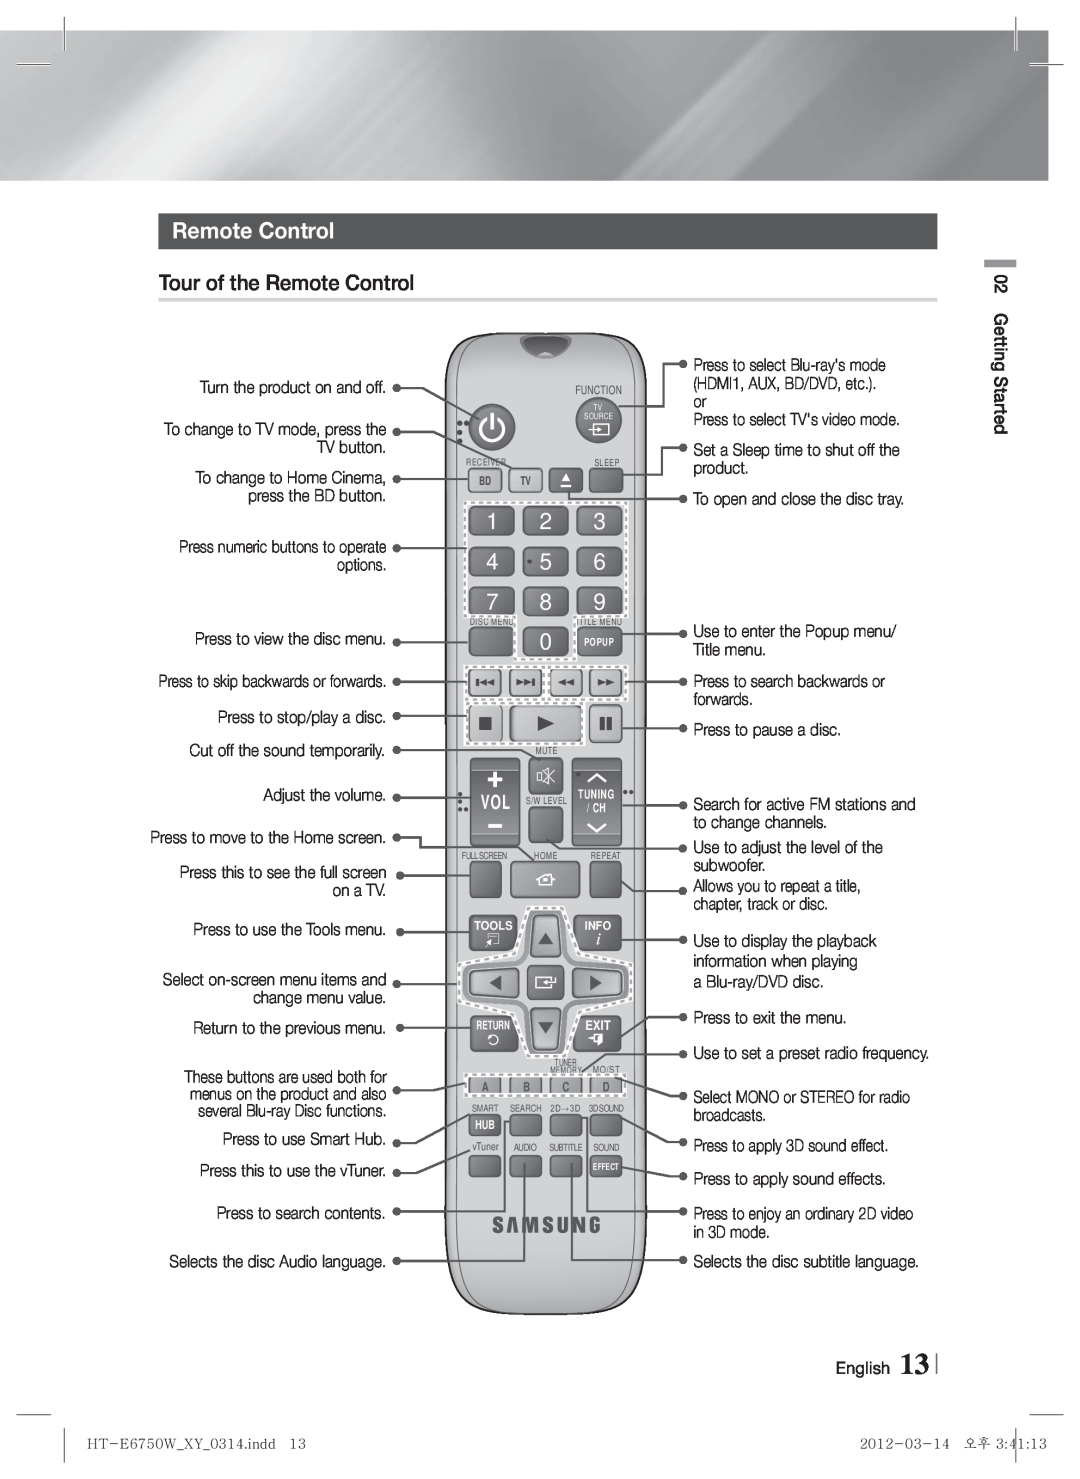 Samsung HT-E6750W Remote Control, 3 6, Turn the product on and off, To change to TV mode, press the TV button, options 